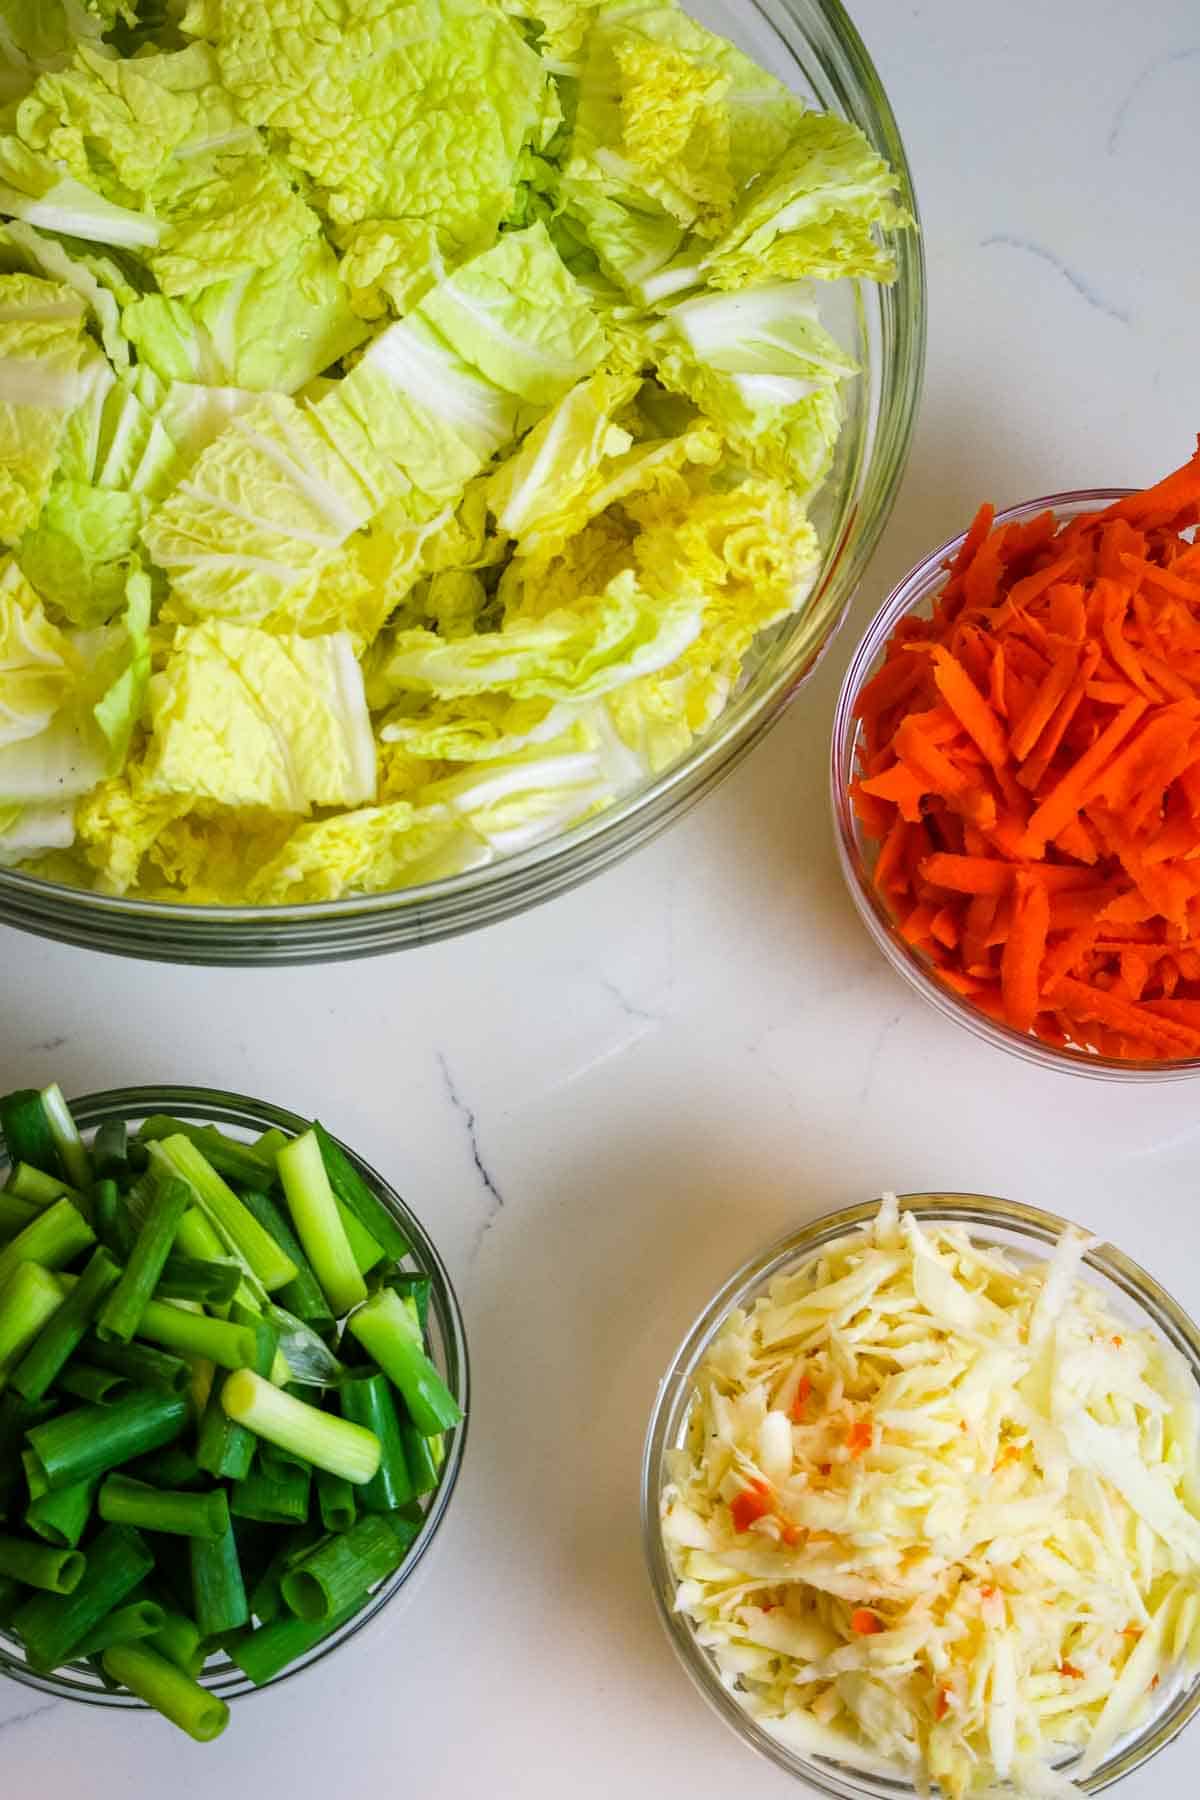 prepped kimchi ingredients in separate bowls. 